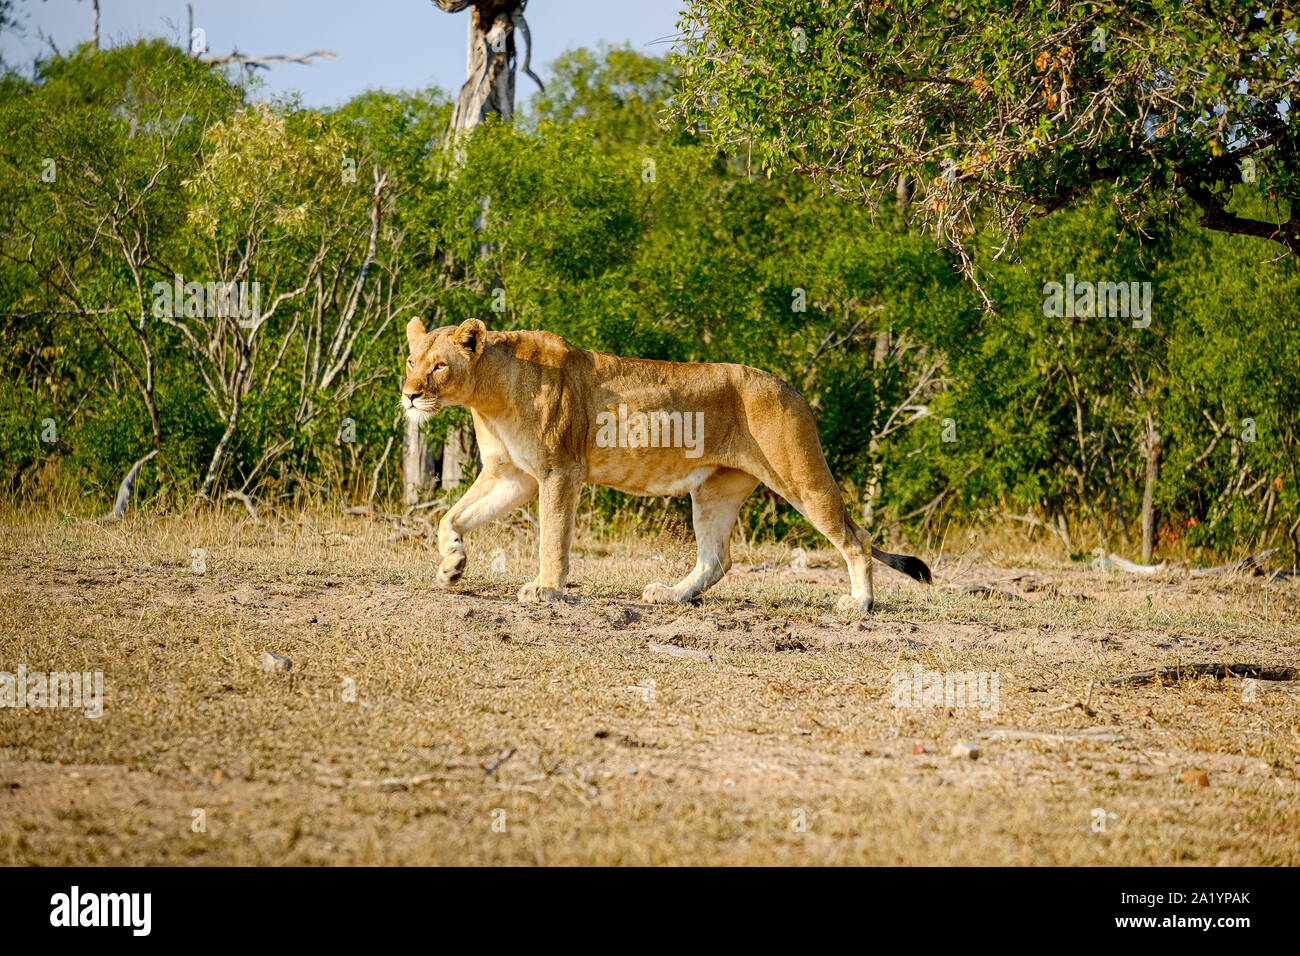 African lioness walking alone in the wild Stock Photo